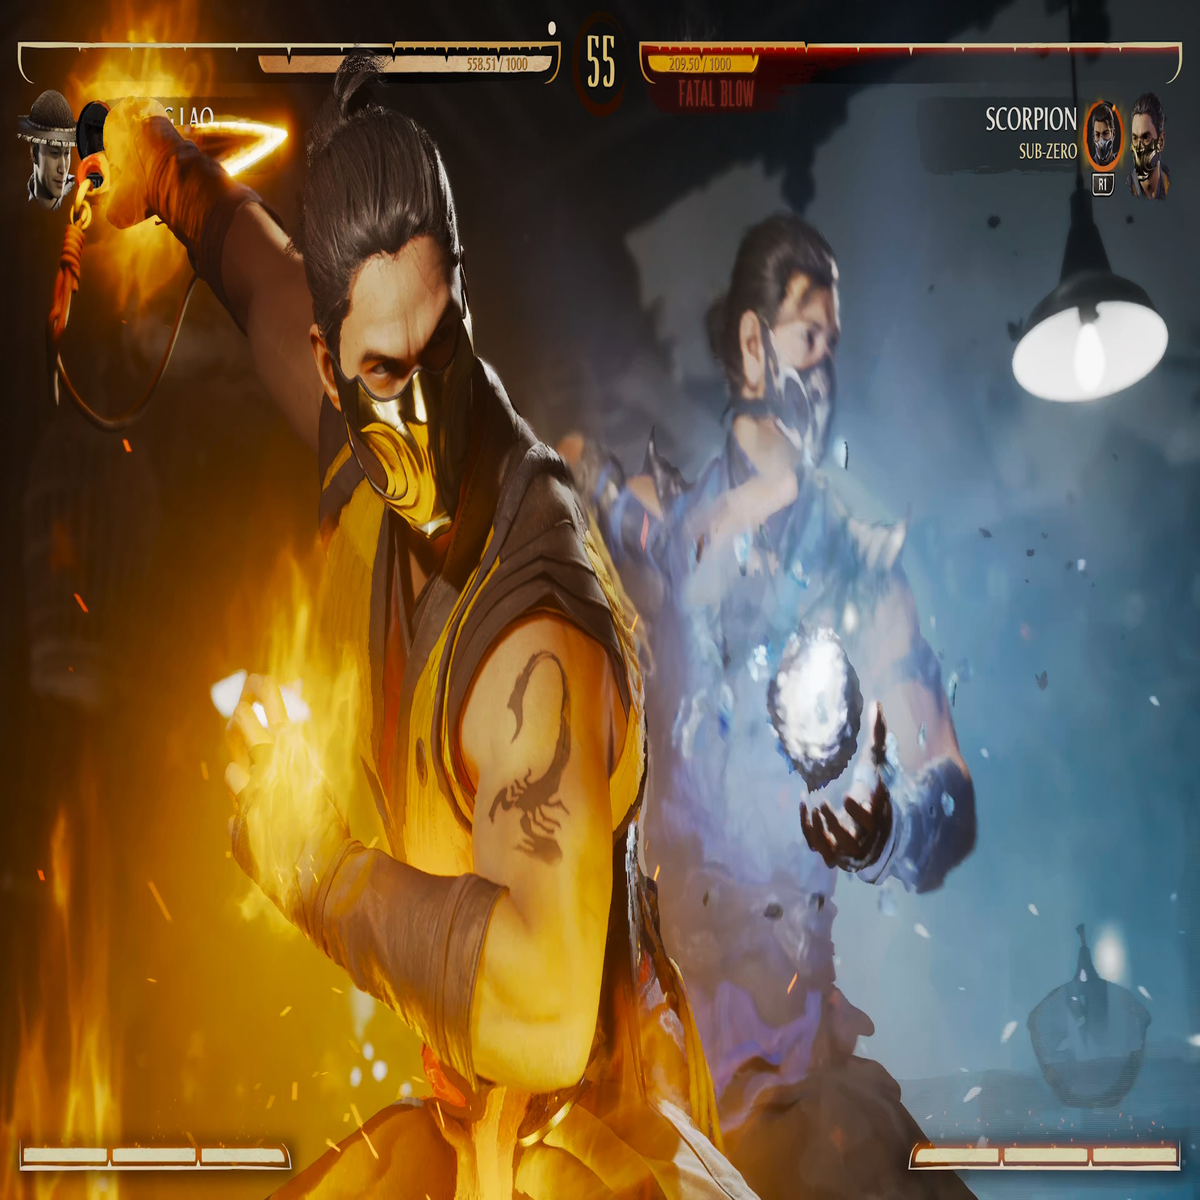 Mortal Kombat 1 Hands-On Preview - We Love What We're Seeing